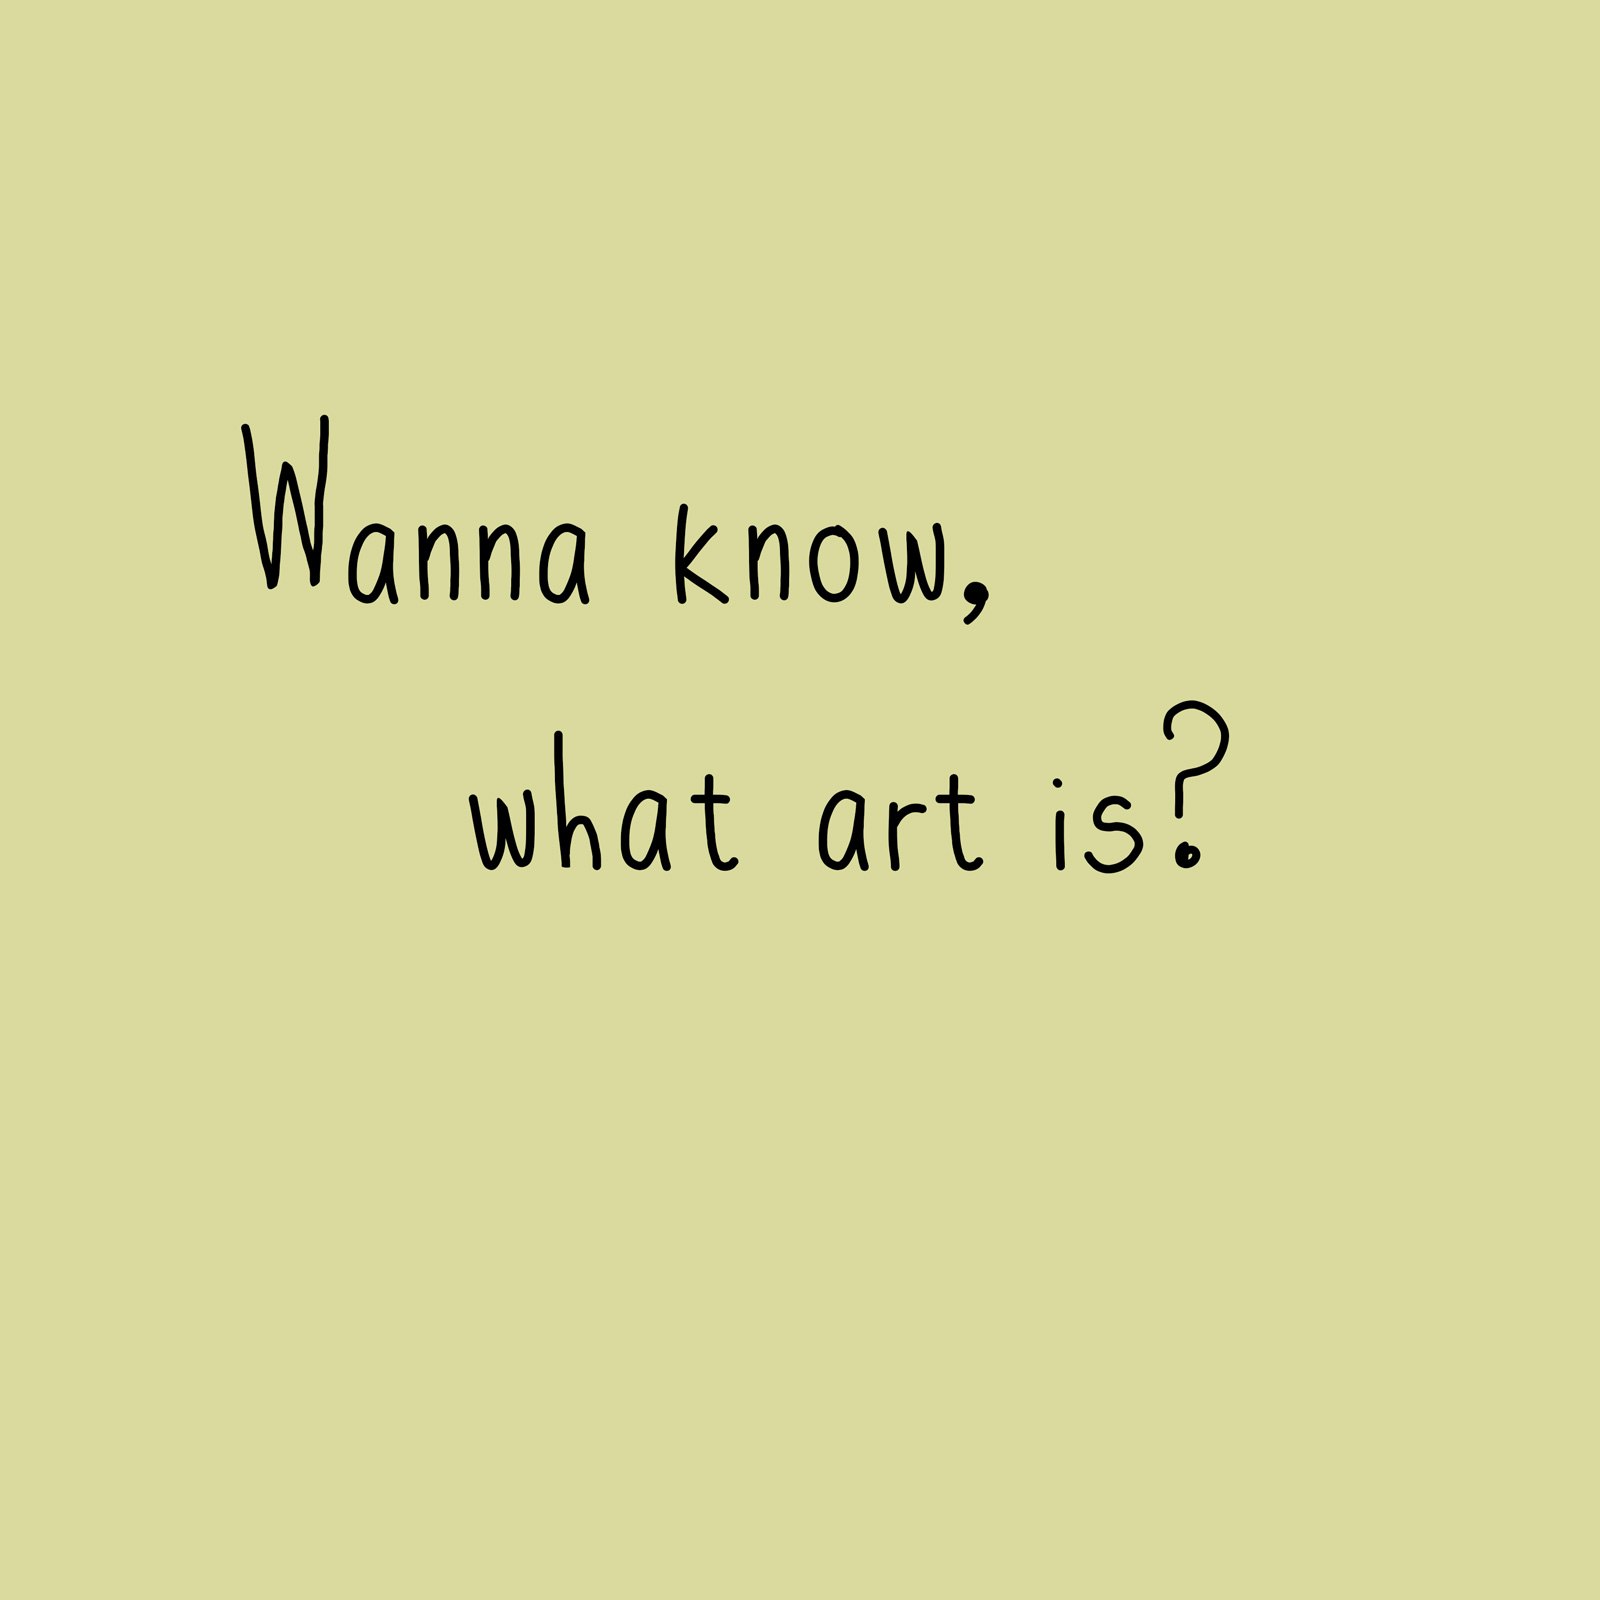 Wanna know what art is?